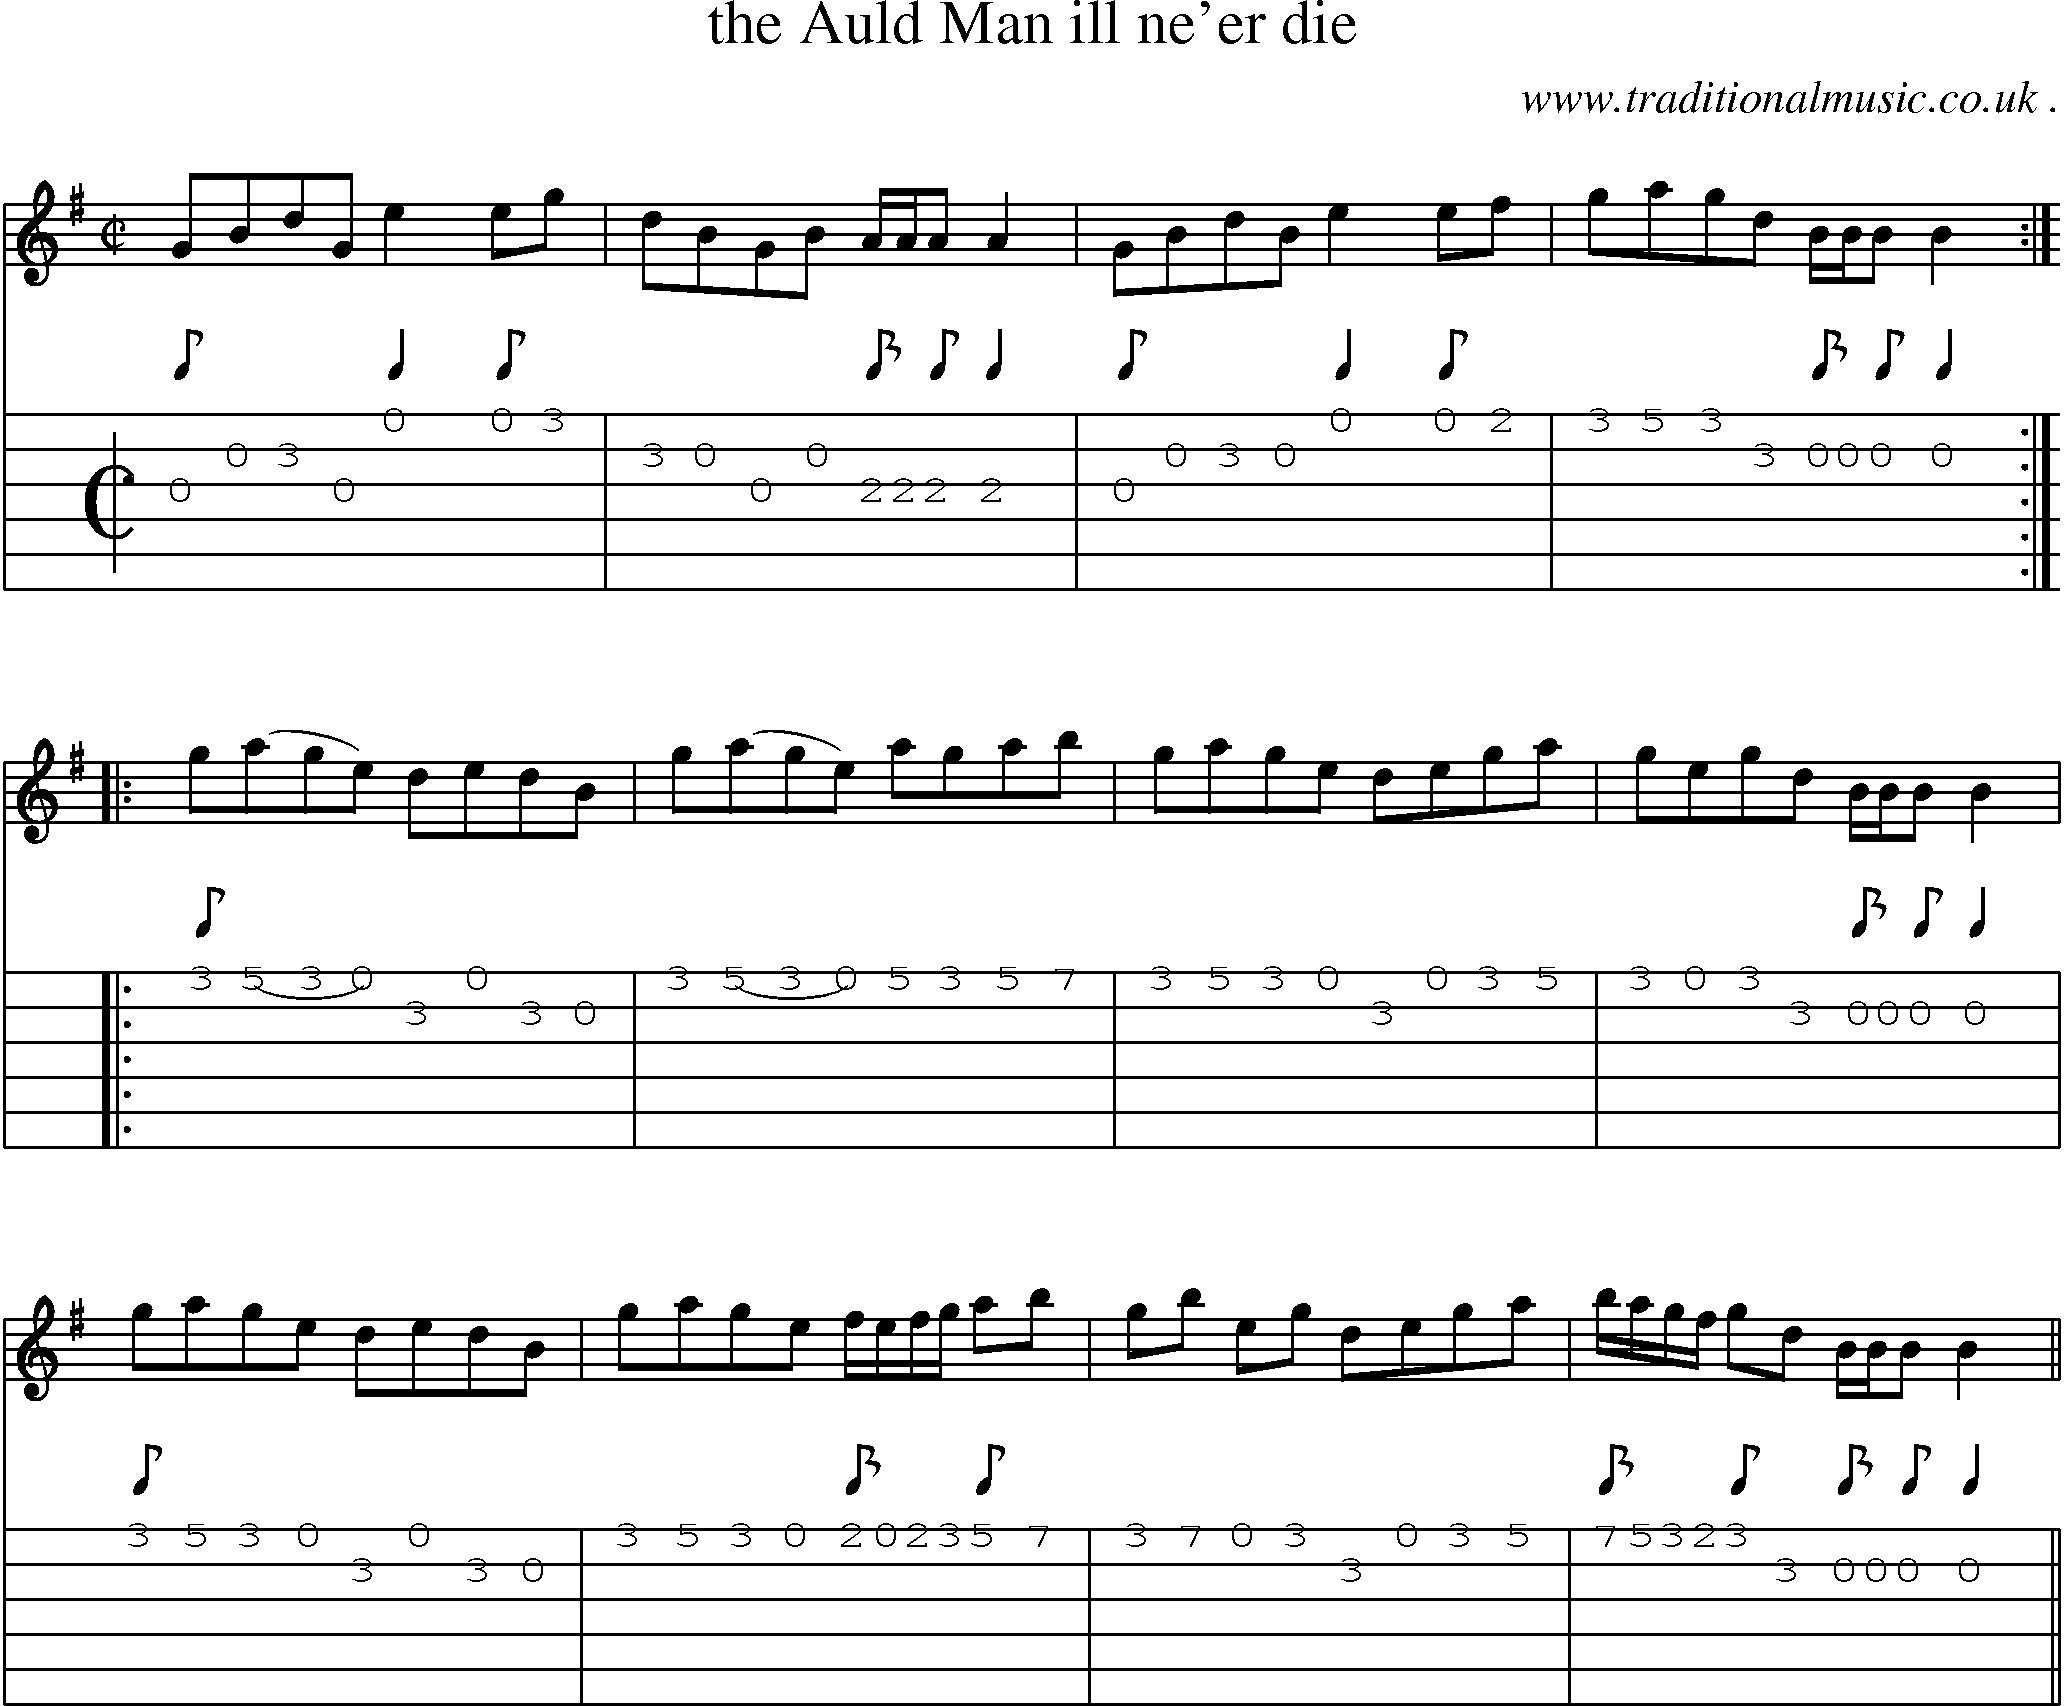 Sheet-Music and Guitar Tabs for The Auld Man Ill Neer Die